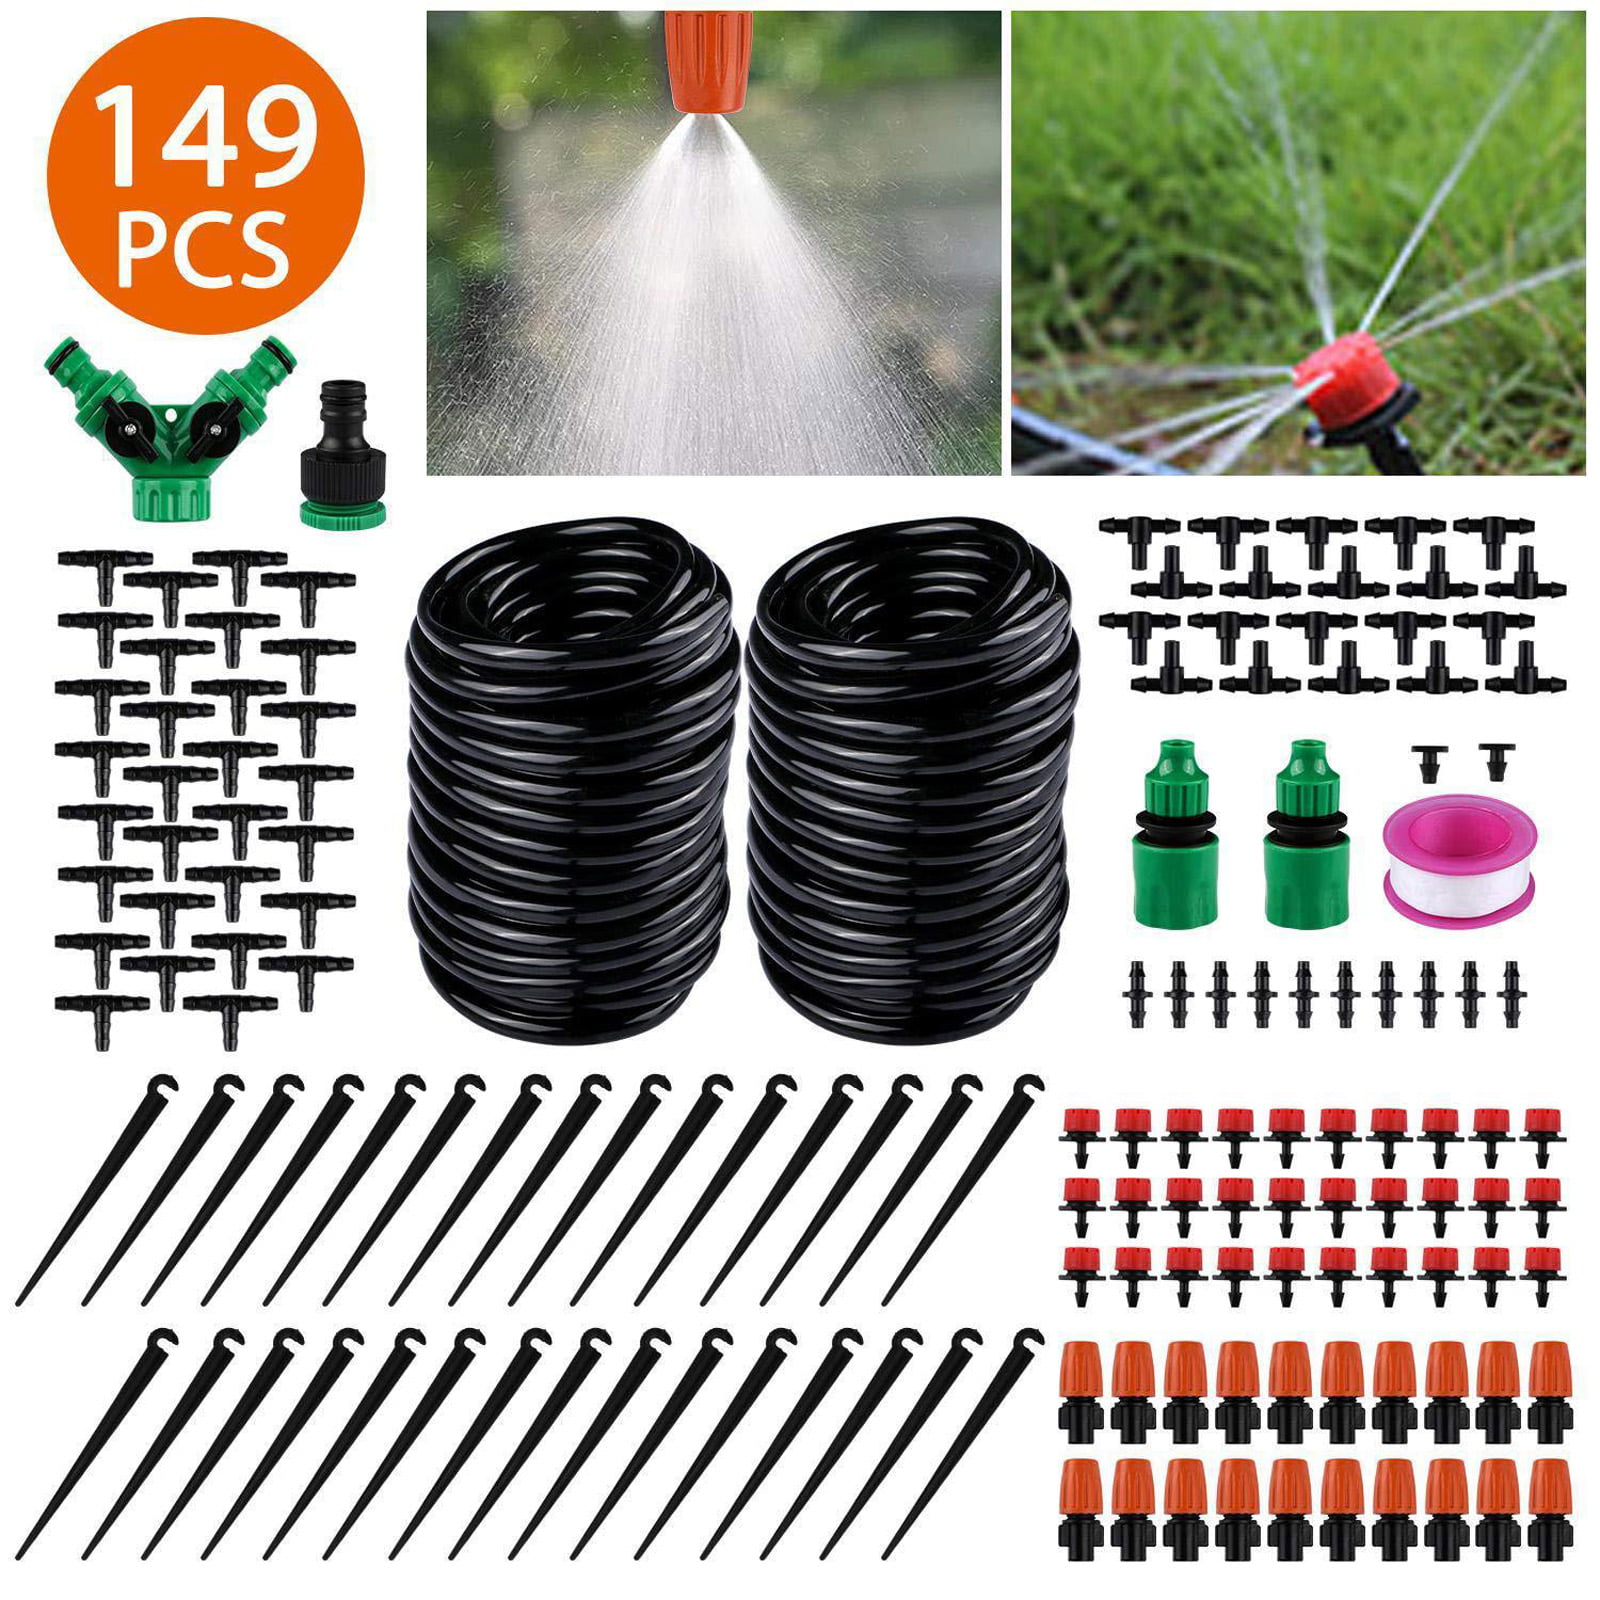 30M DIY Micro Drip Irrigation Kit System Hose Drippers Garden Plant Watering 